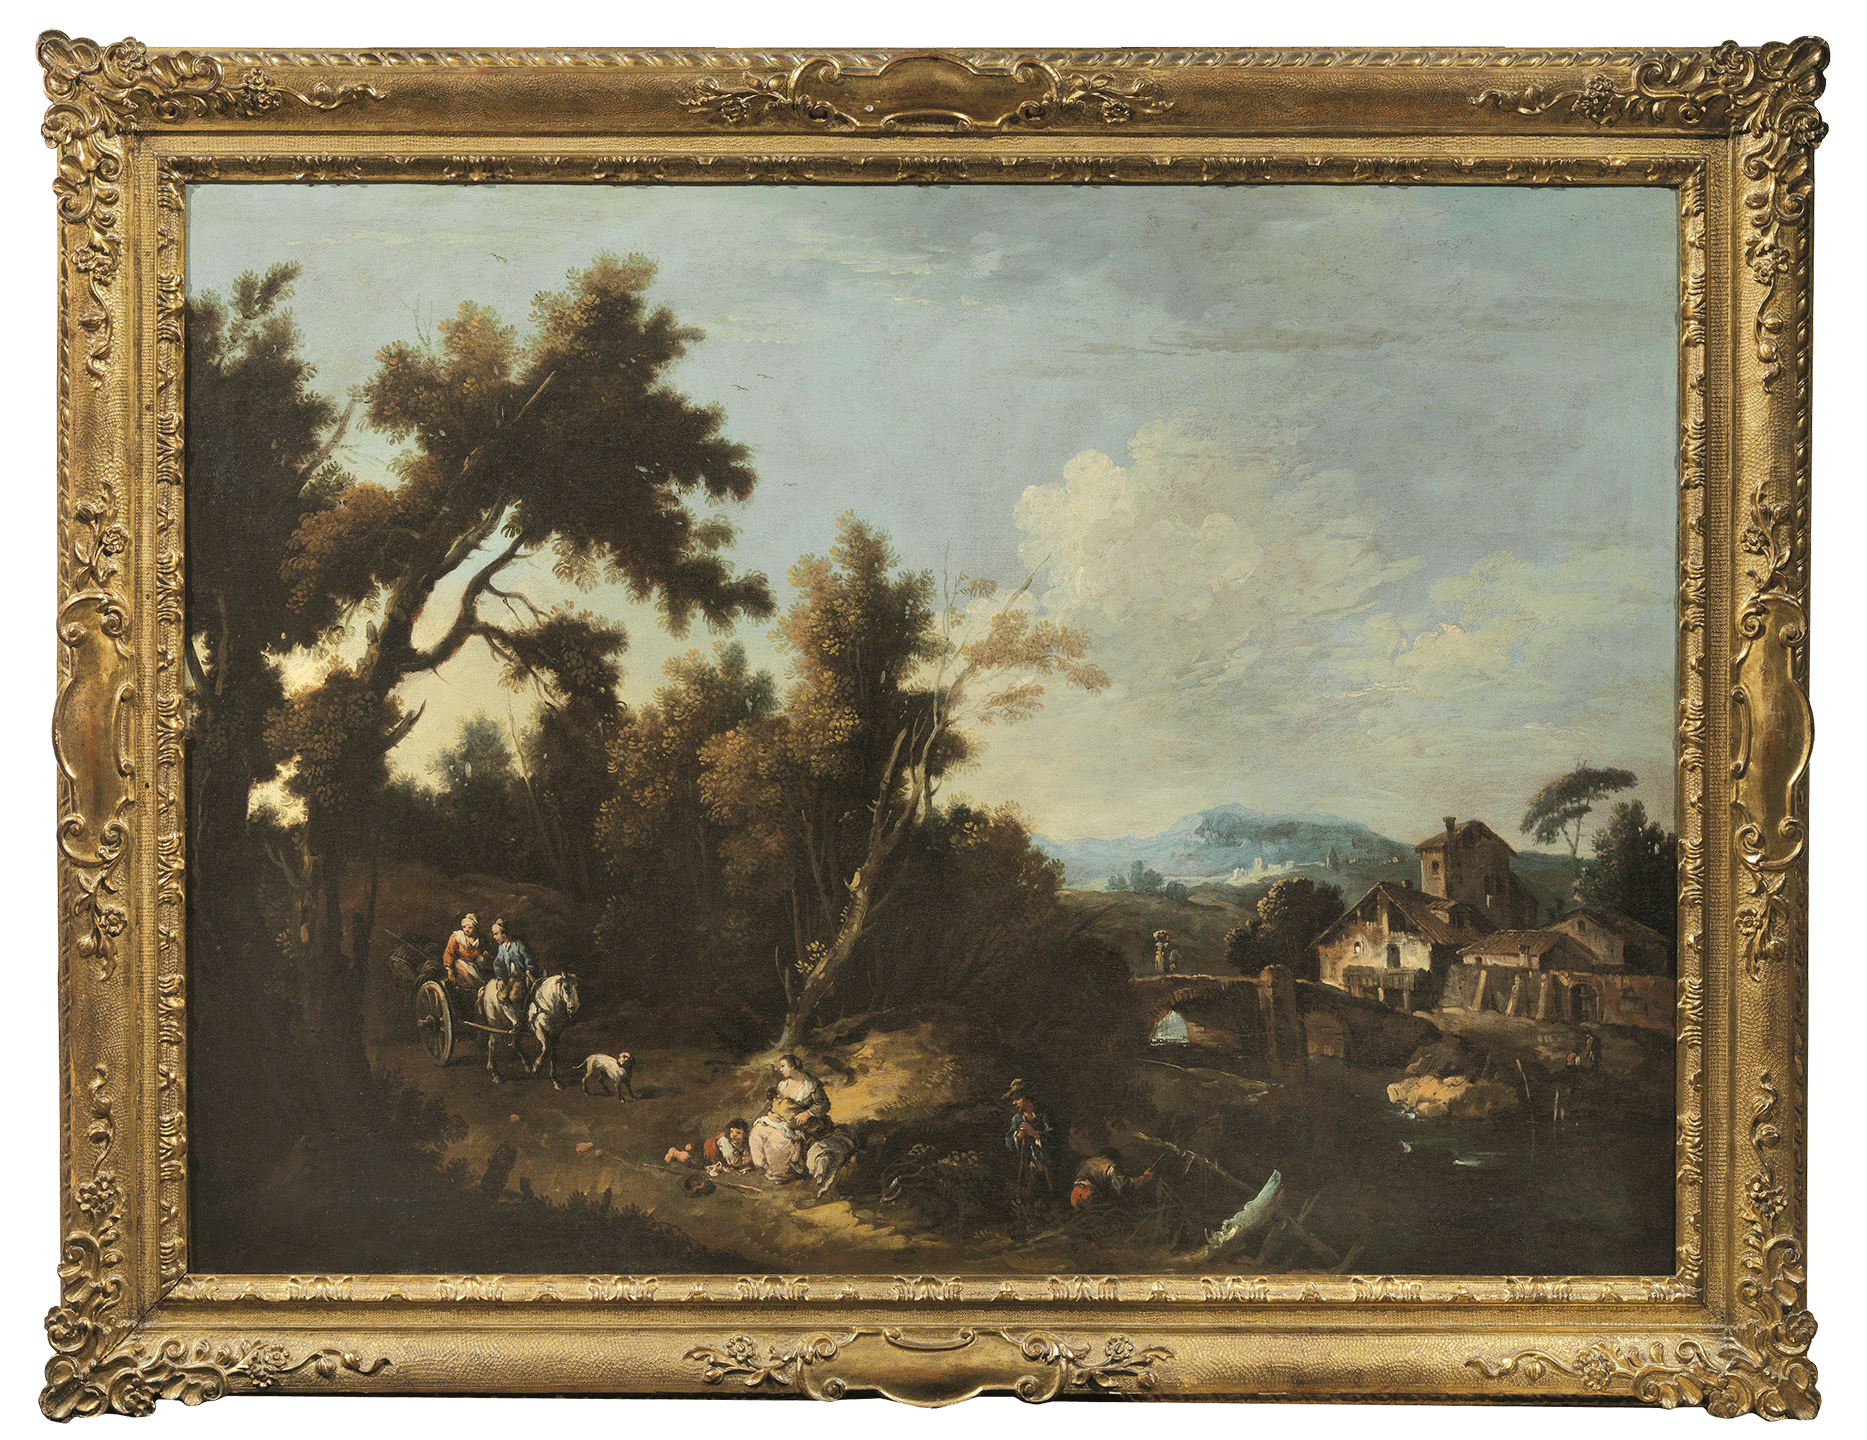 Wooden Landscape with houses and farmers